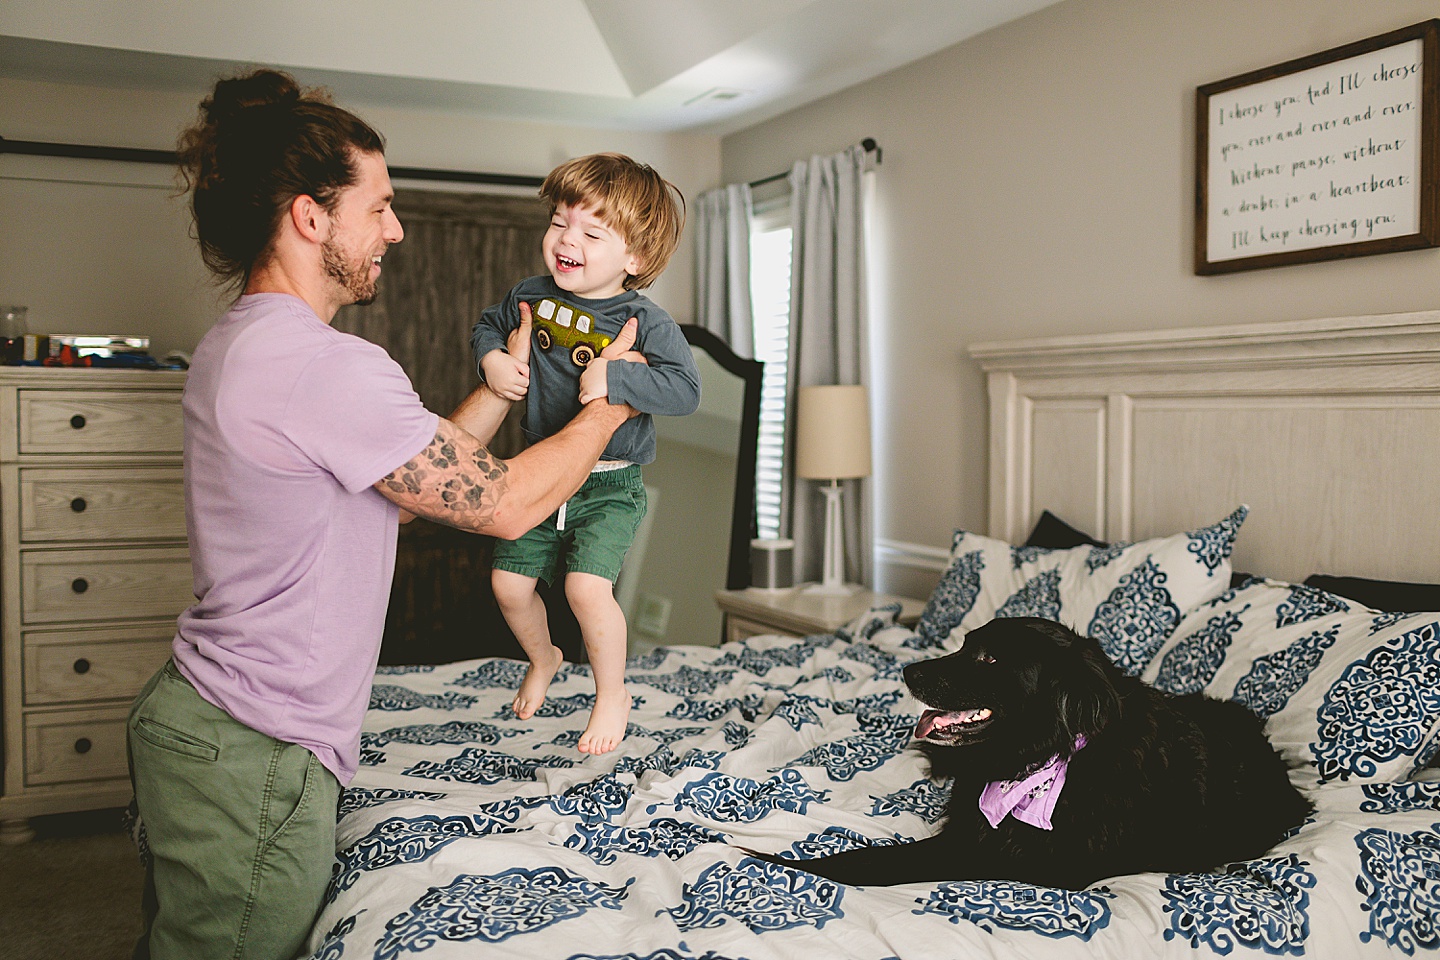 Toddler jumping on the bed with black dog